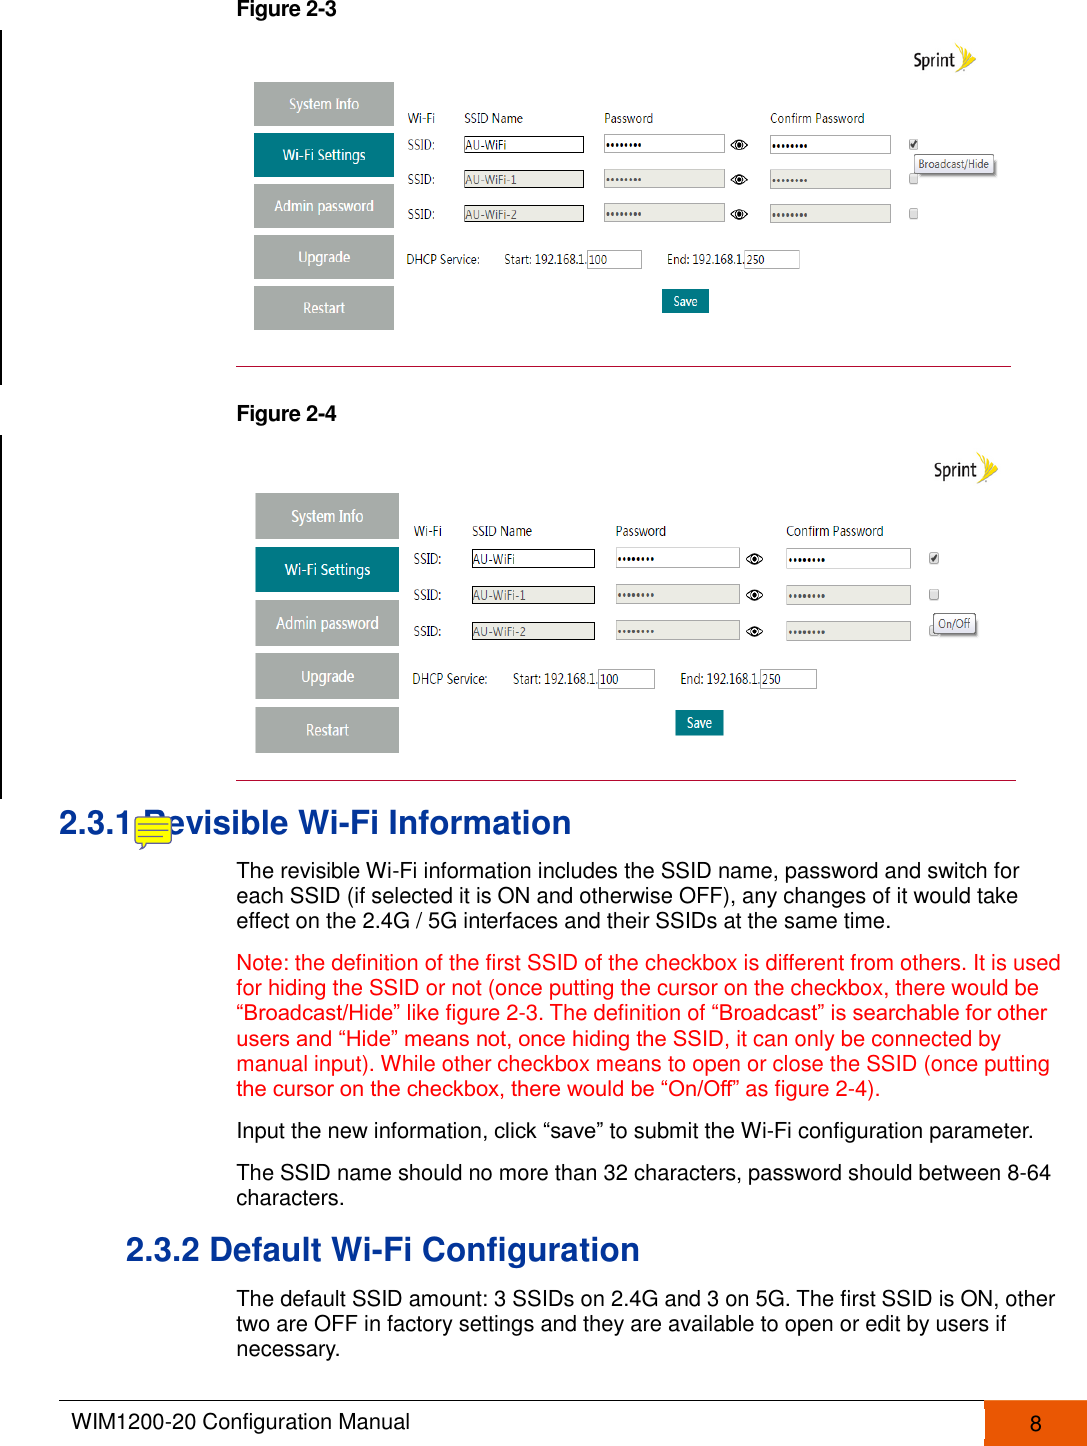  WIM1200-20 Configuration Manual   8  Figure 2-3   Figure 2-4   2.3.1 Revisible Wi-Fi Information The revisible Wi-Fi information includes the SSID name, password and switch for each SSID (if selected it is ON and otherwise OFF), any changes of it would take effect on the 2.4G / 5G interfaces and their SSIDs at the same time.   Note: the definition of the first SSID of the checkbox is different from others. It is used for hiding the SSID or not (once putting the cursor on the checkbox, there would be “Broadcast/Hide” like figure 2-3. The definition of “Broadcast” is searchable for other users and “Hide” means not, once hiding the SSID, it can only be connected by manual input). While other checkbox means to open or close the SSID (once putting the cursor on the checkbox, there would be “On/Off” as figure 2-4). Input the new information, click “save” to submit the Wi-Fi configuration parameter. The SSID name should no more than 32 characters, password should between 8-64 characters. 2.3.2 Default Wi-Fi Configuration The default SSID amount: 3 SSIDs on 2.4G and 3 on 5G. The first SSID is ON, other two are OFF in factory settings and they are available to open or edit by users if necessary. 